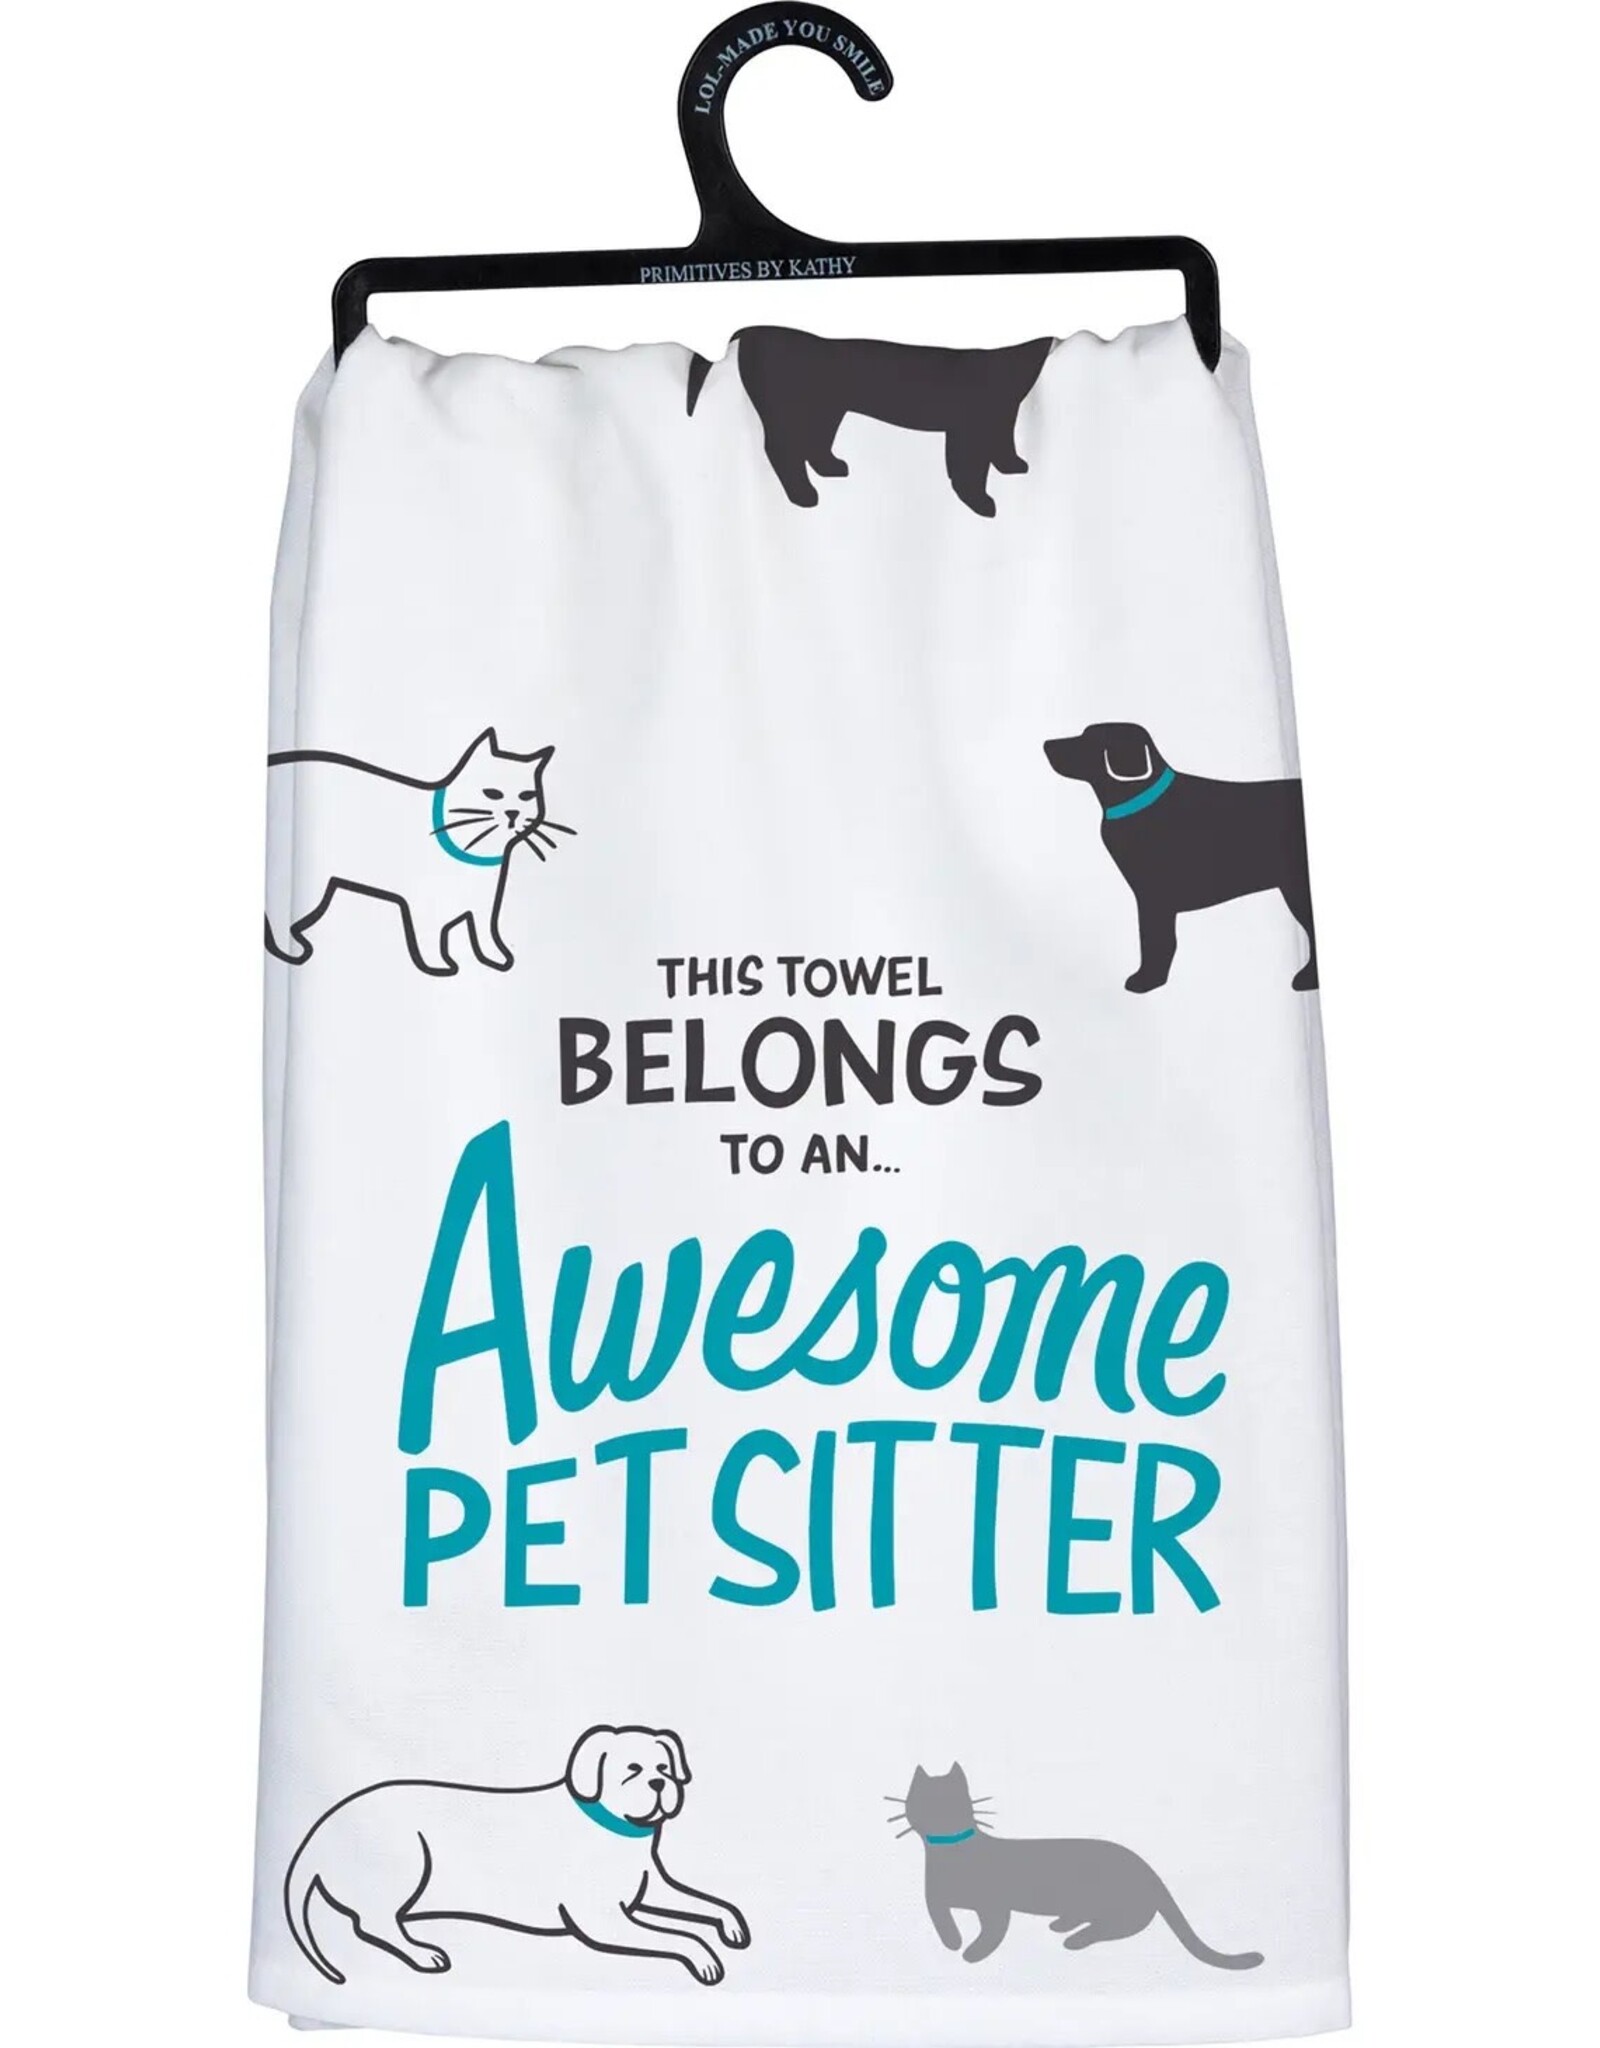 Primitives by Kathy Awesome Pet Sitter Dish Towel